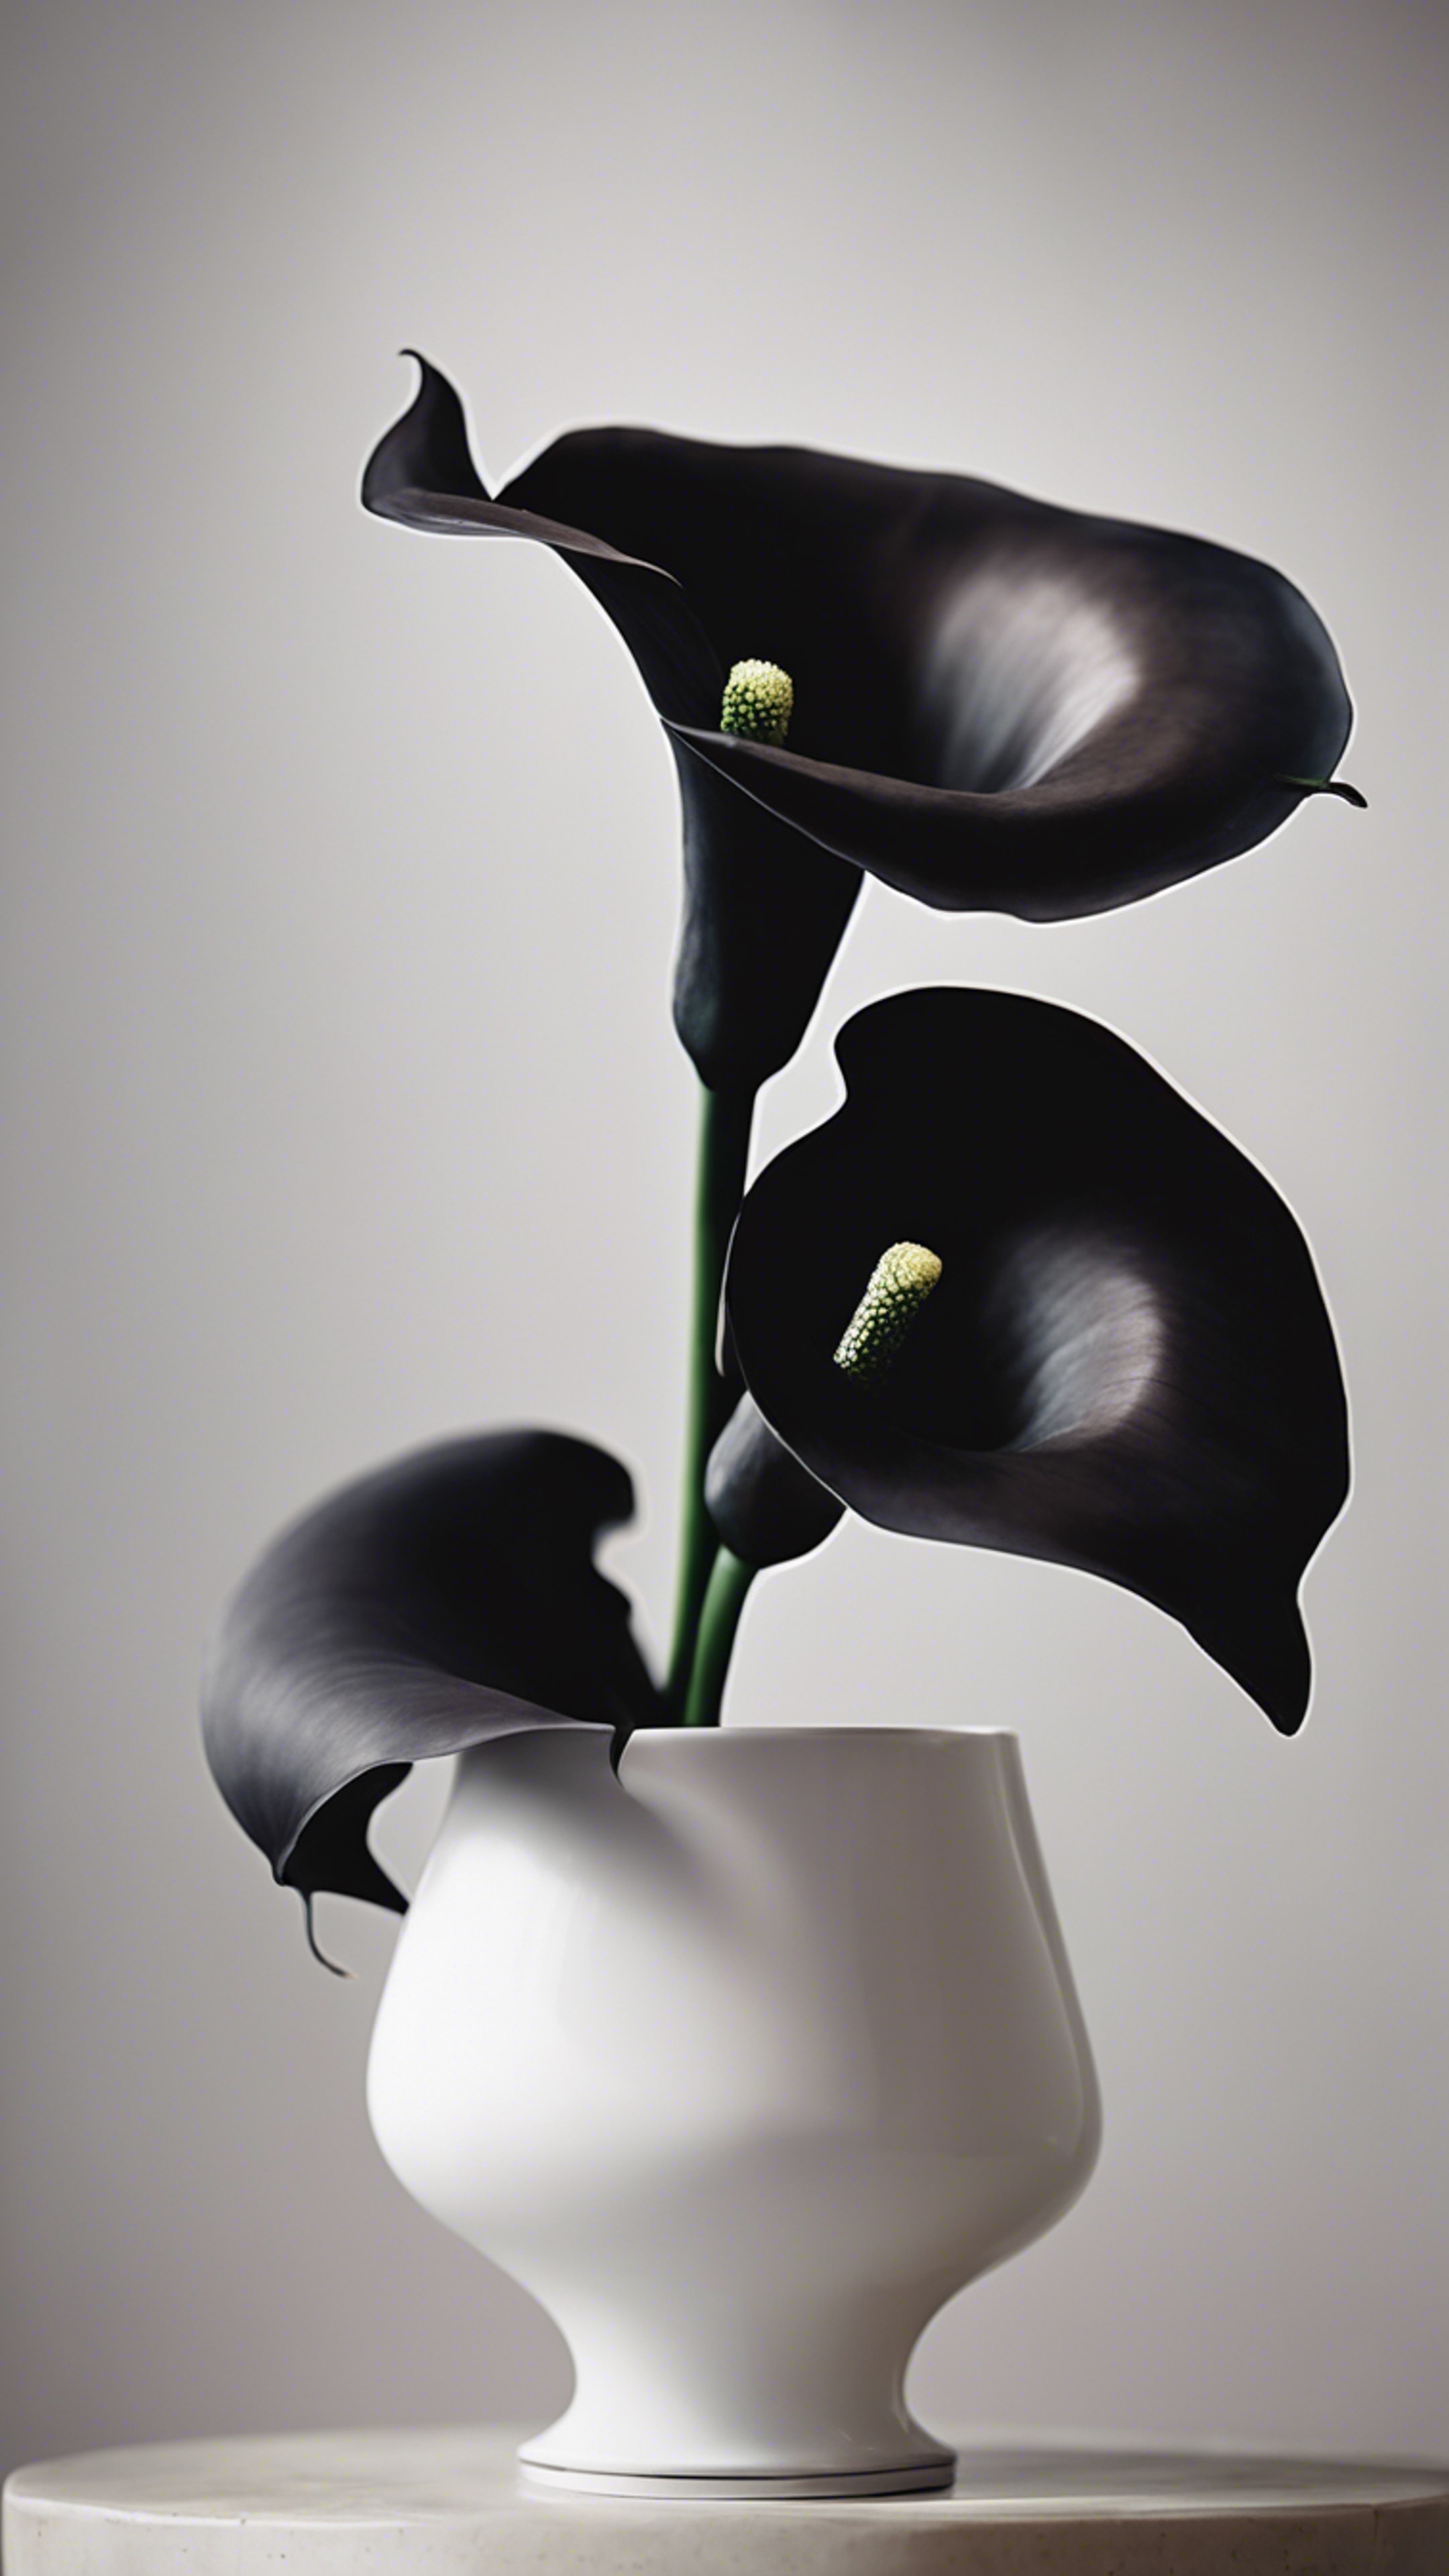 A breathtaking centerpiece featuring a black calla lily in a modern white vase. Tapet[9d5d01b6790e4db4a8d5]